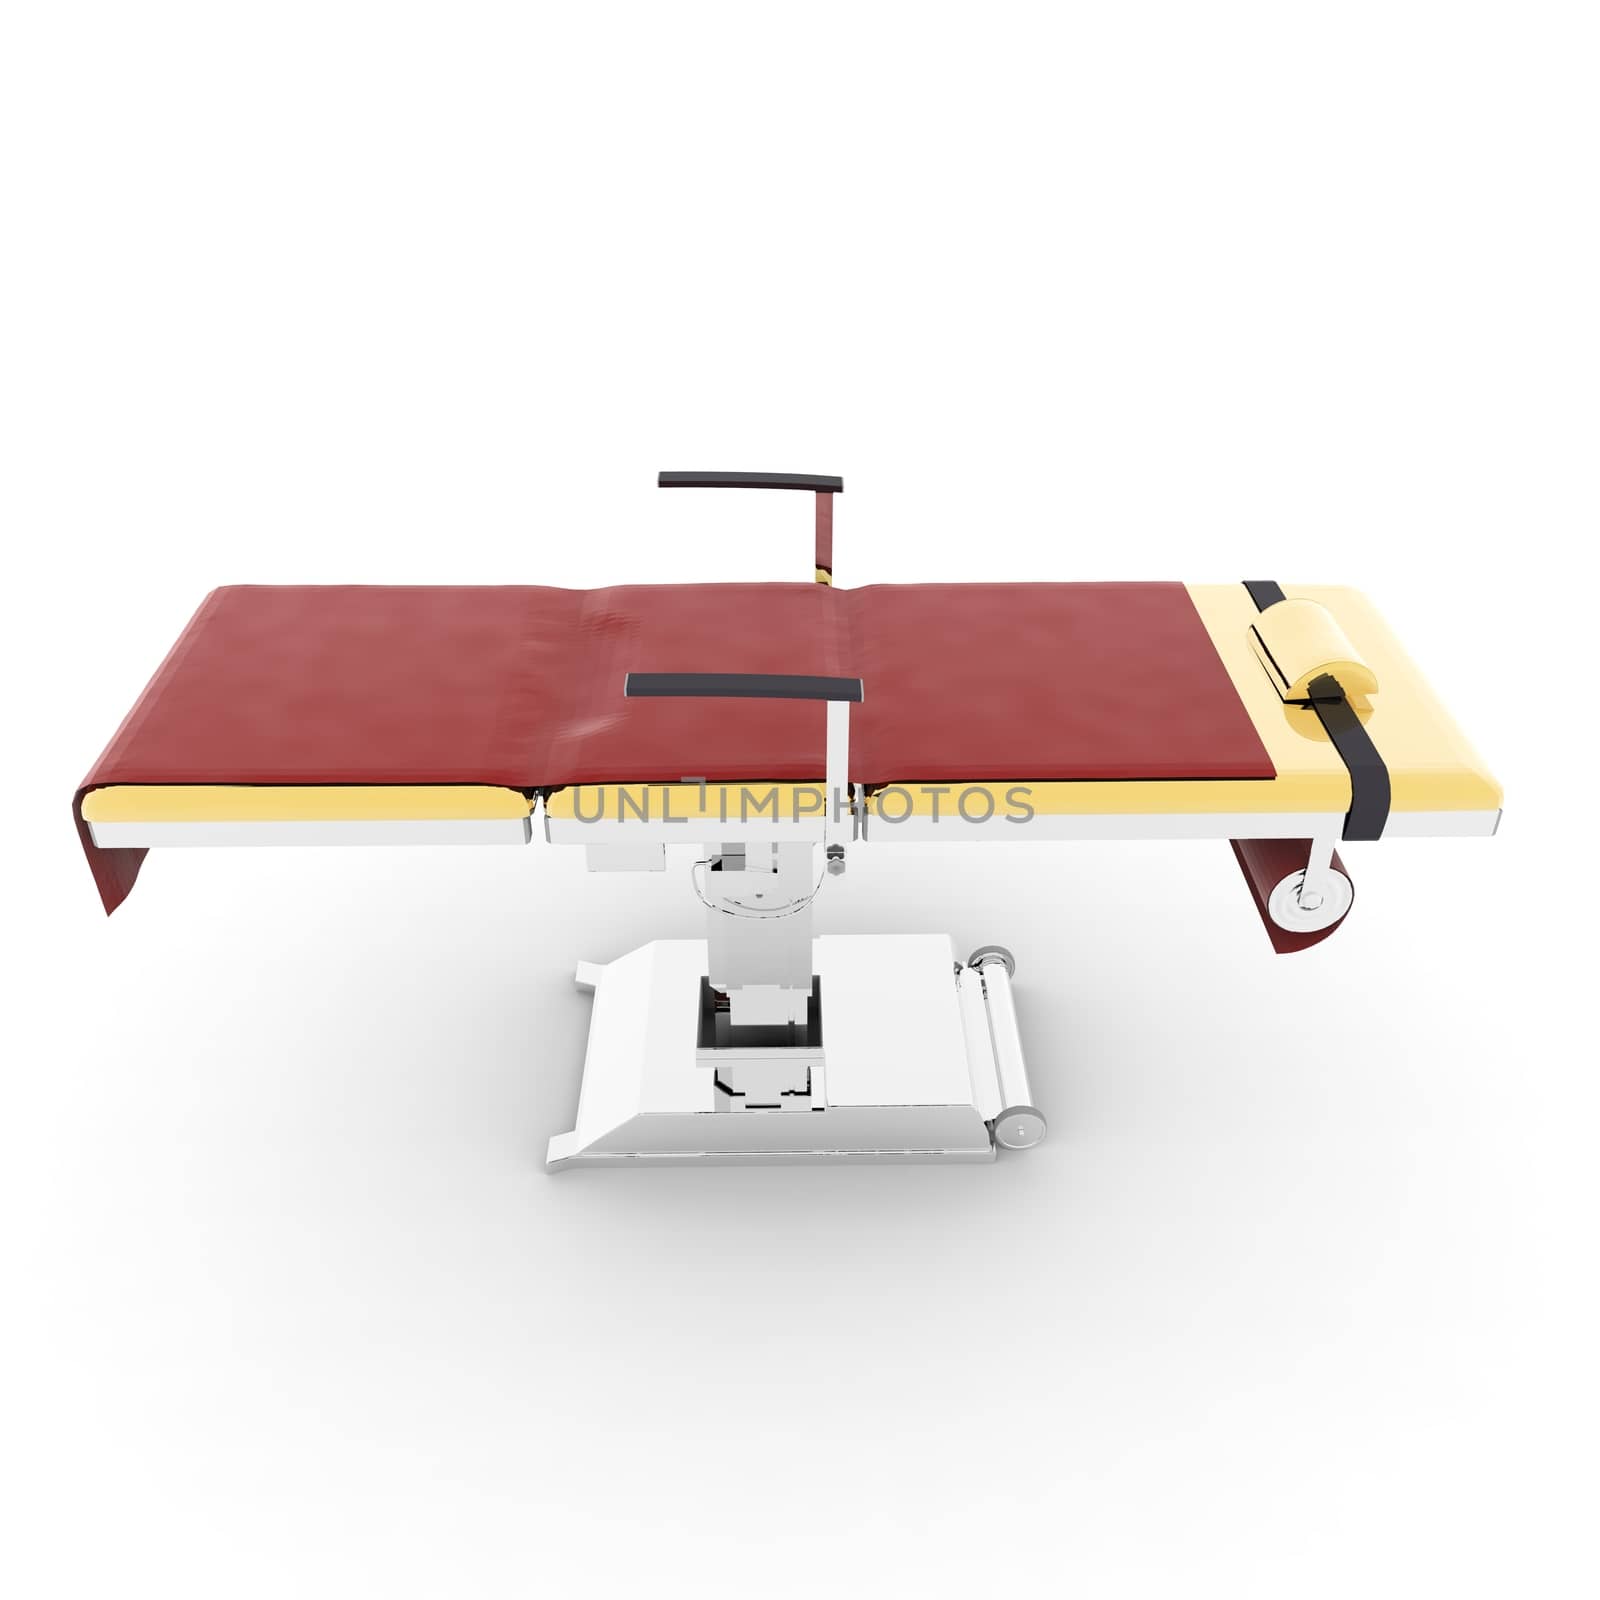 medical table on a white background by totuss